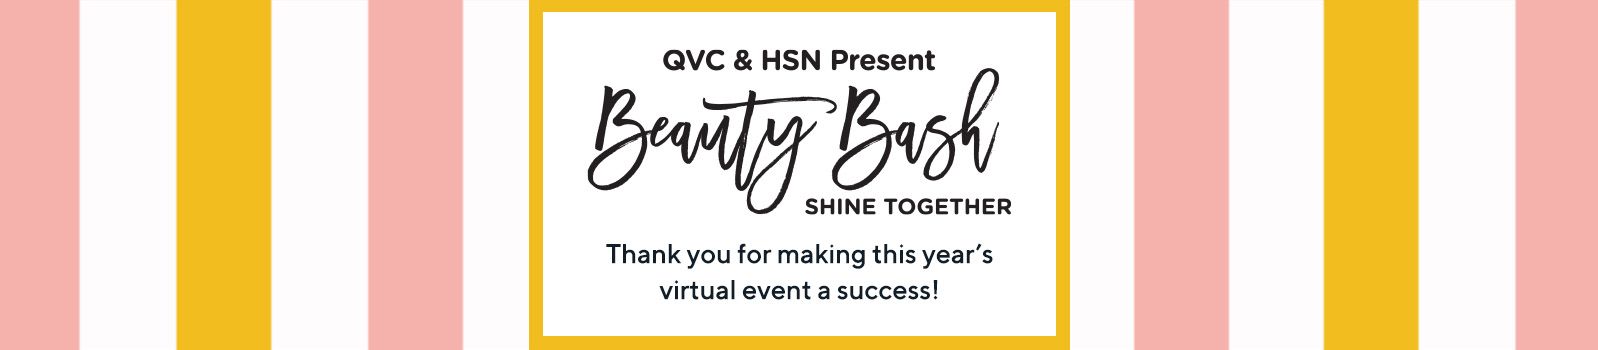 Beauty Bash - Thank you for making this year's virtual event a success!